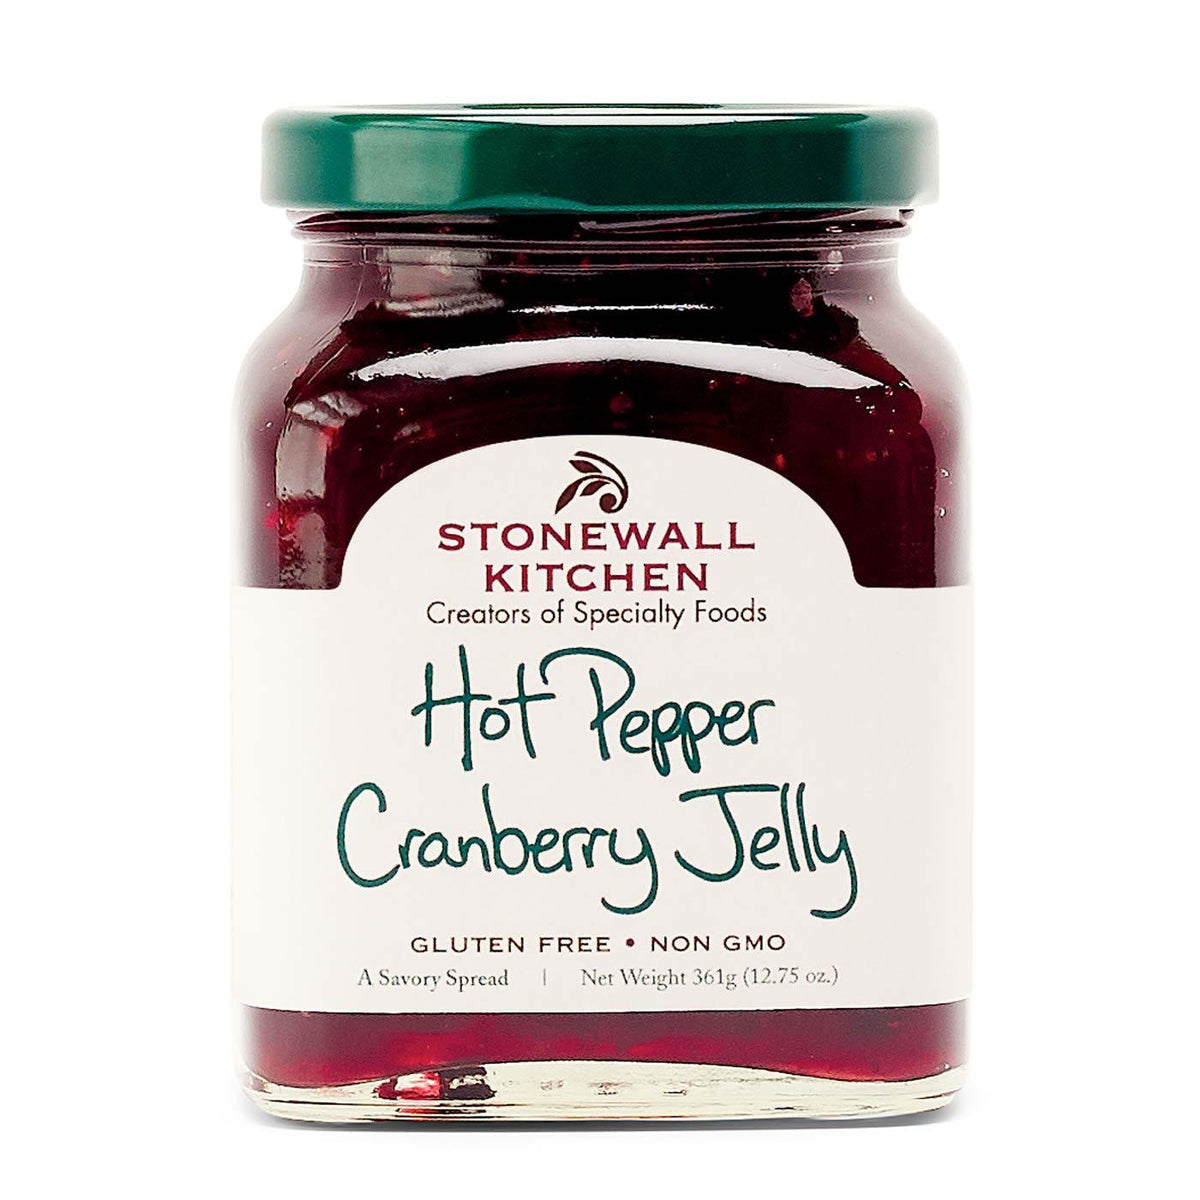 jar of stonewall kitchen hot pepper cranberry jelly 12.75 oz glass jar made in maine